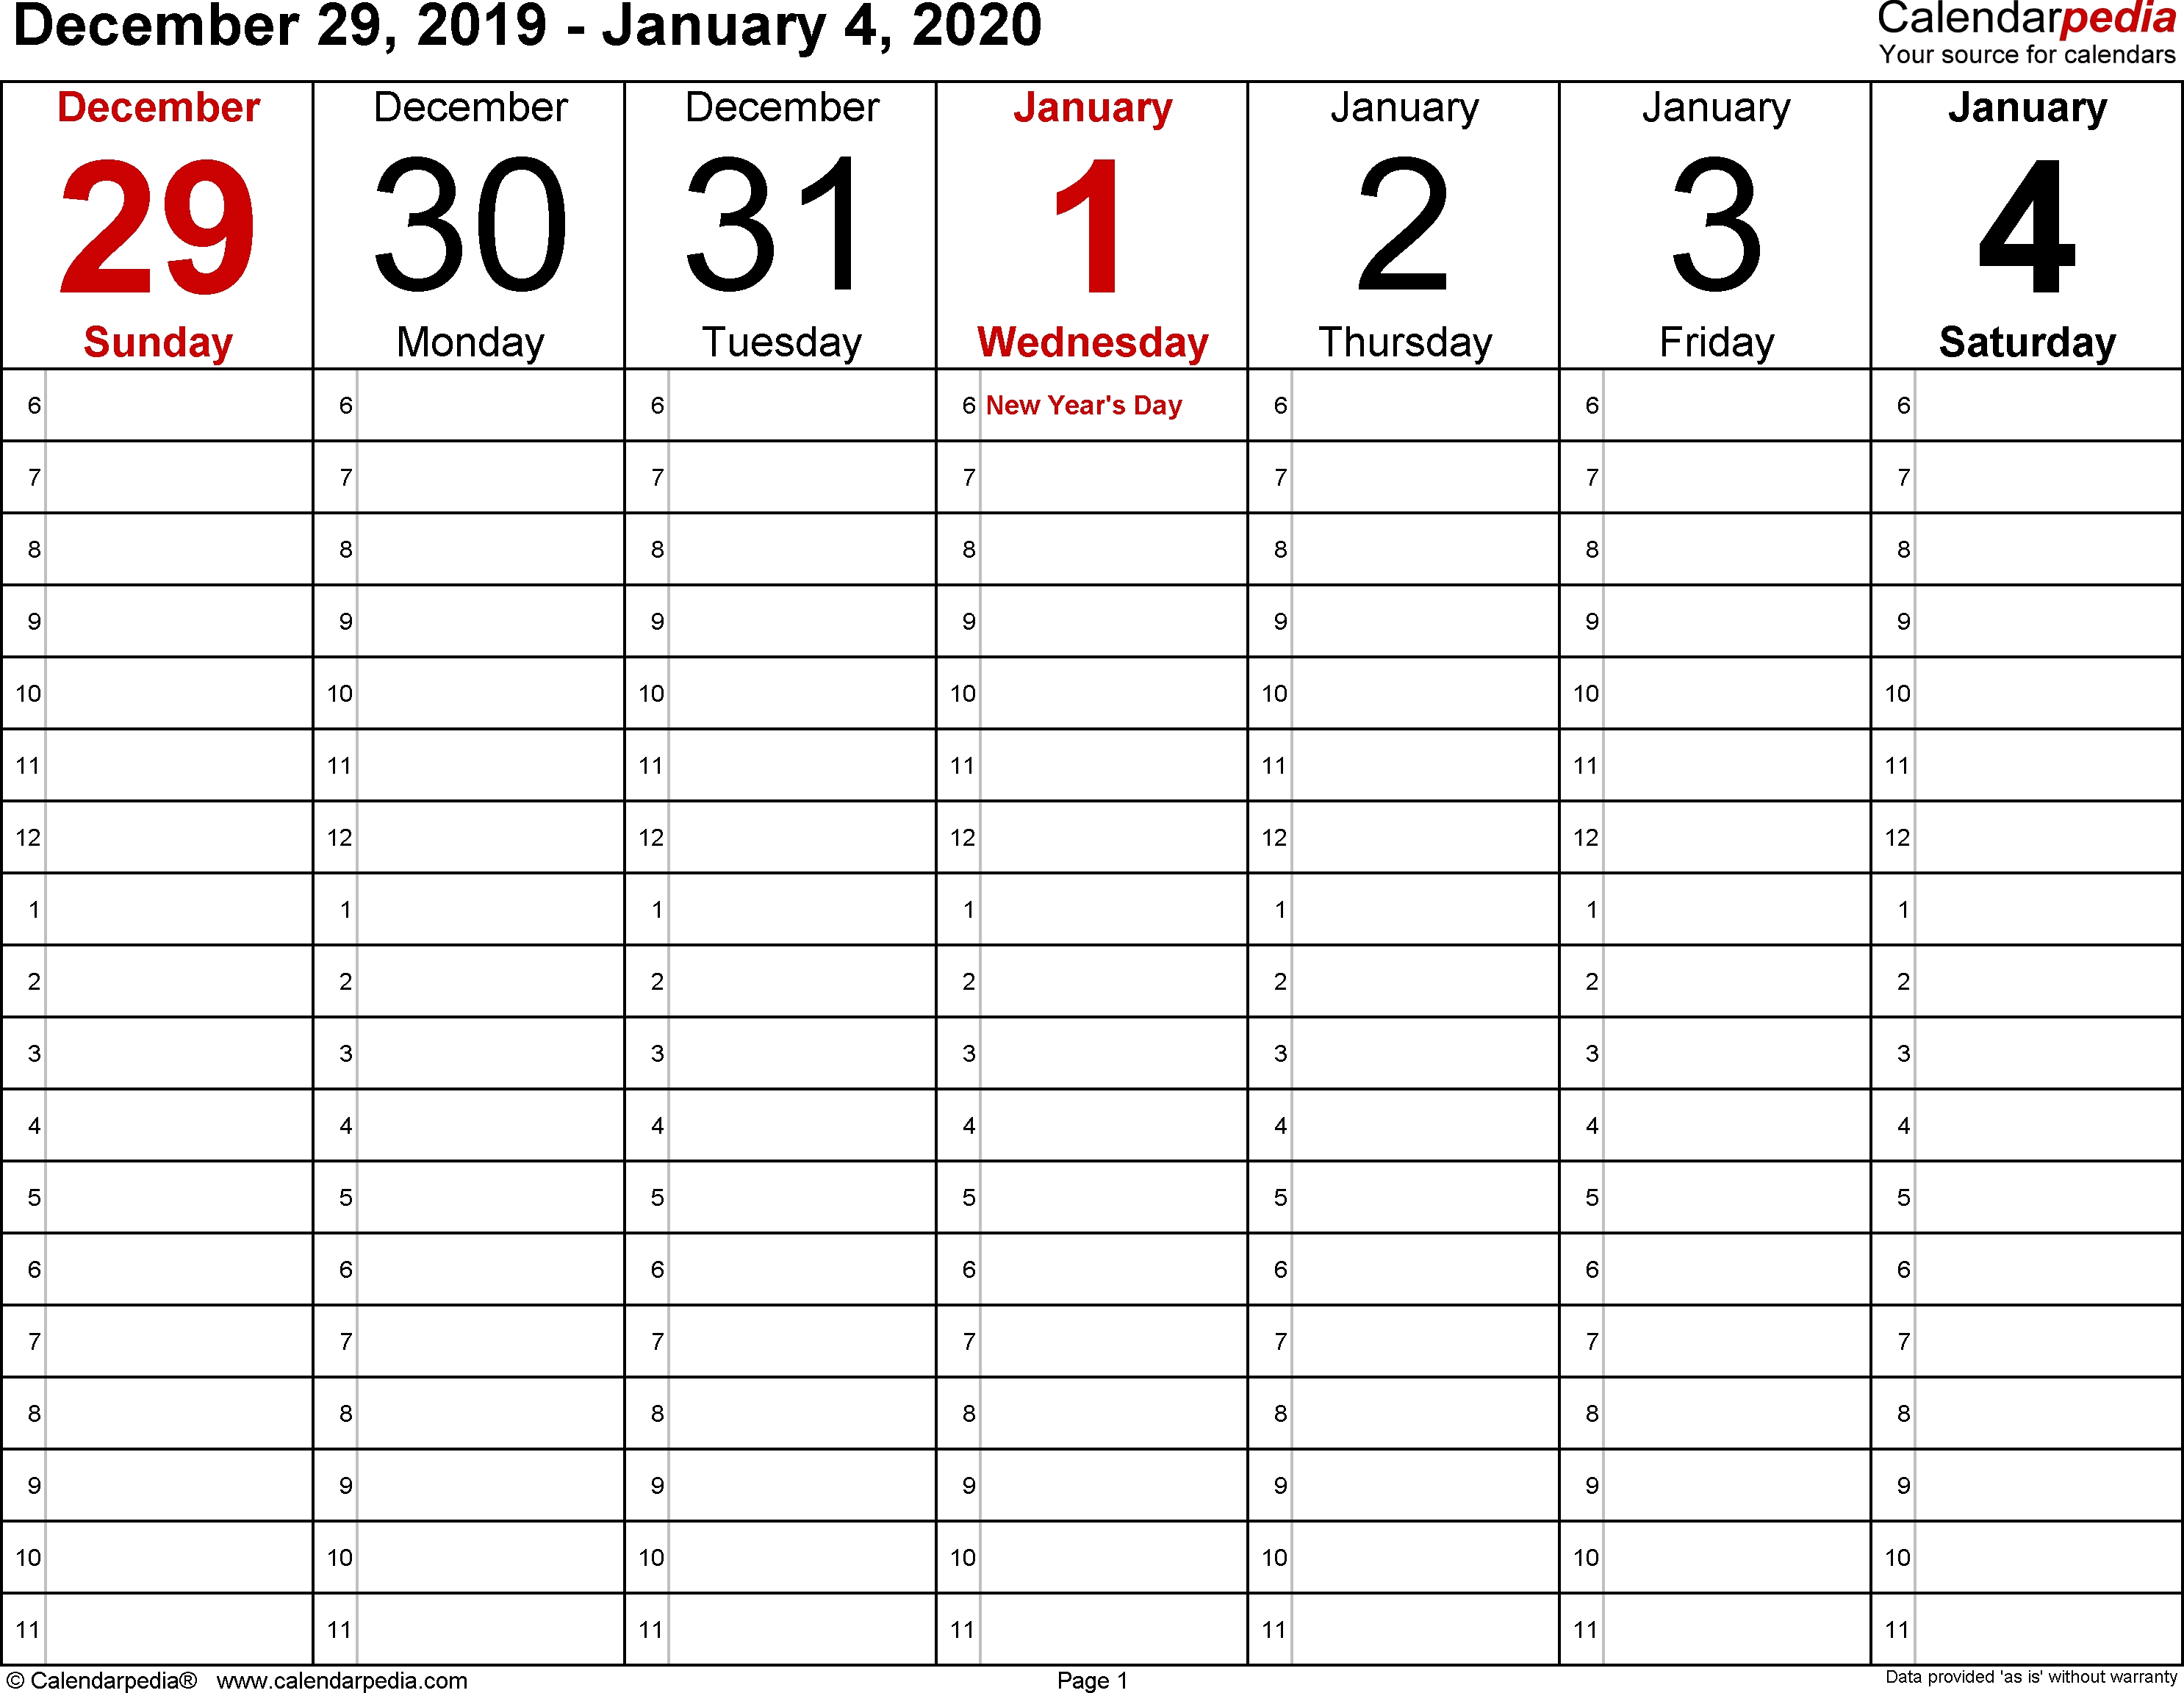 Calendarpedia - Your Source For Calendars Blank Calendars With Days Of The Week Not Numbered